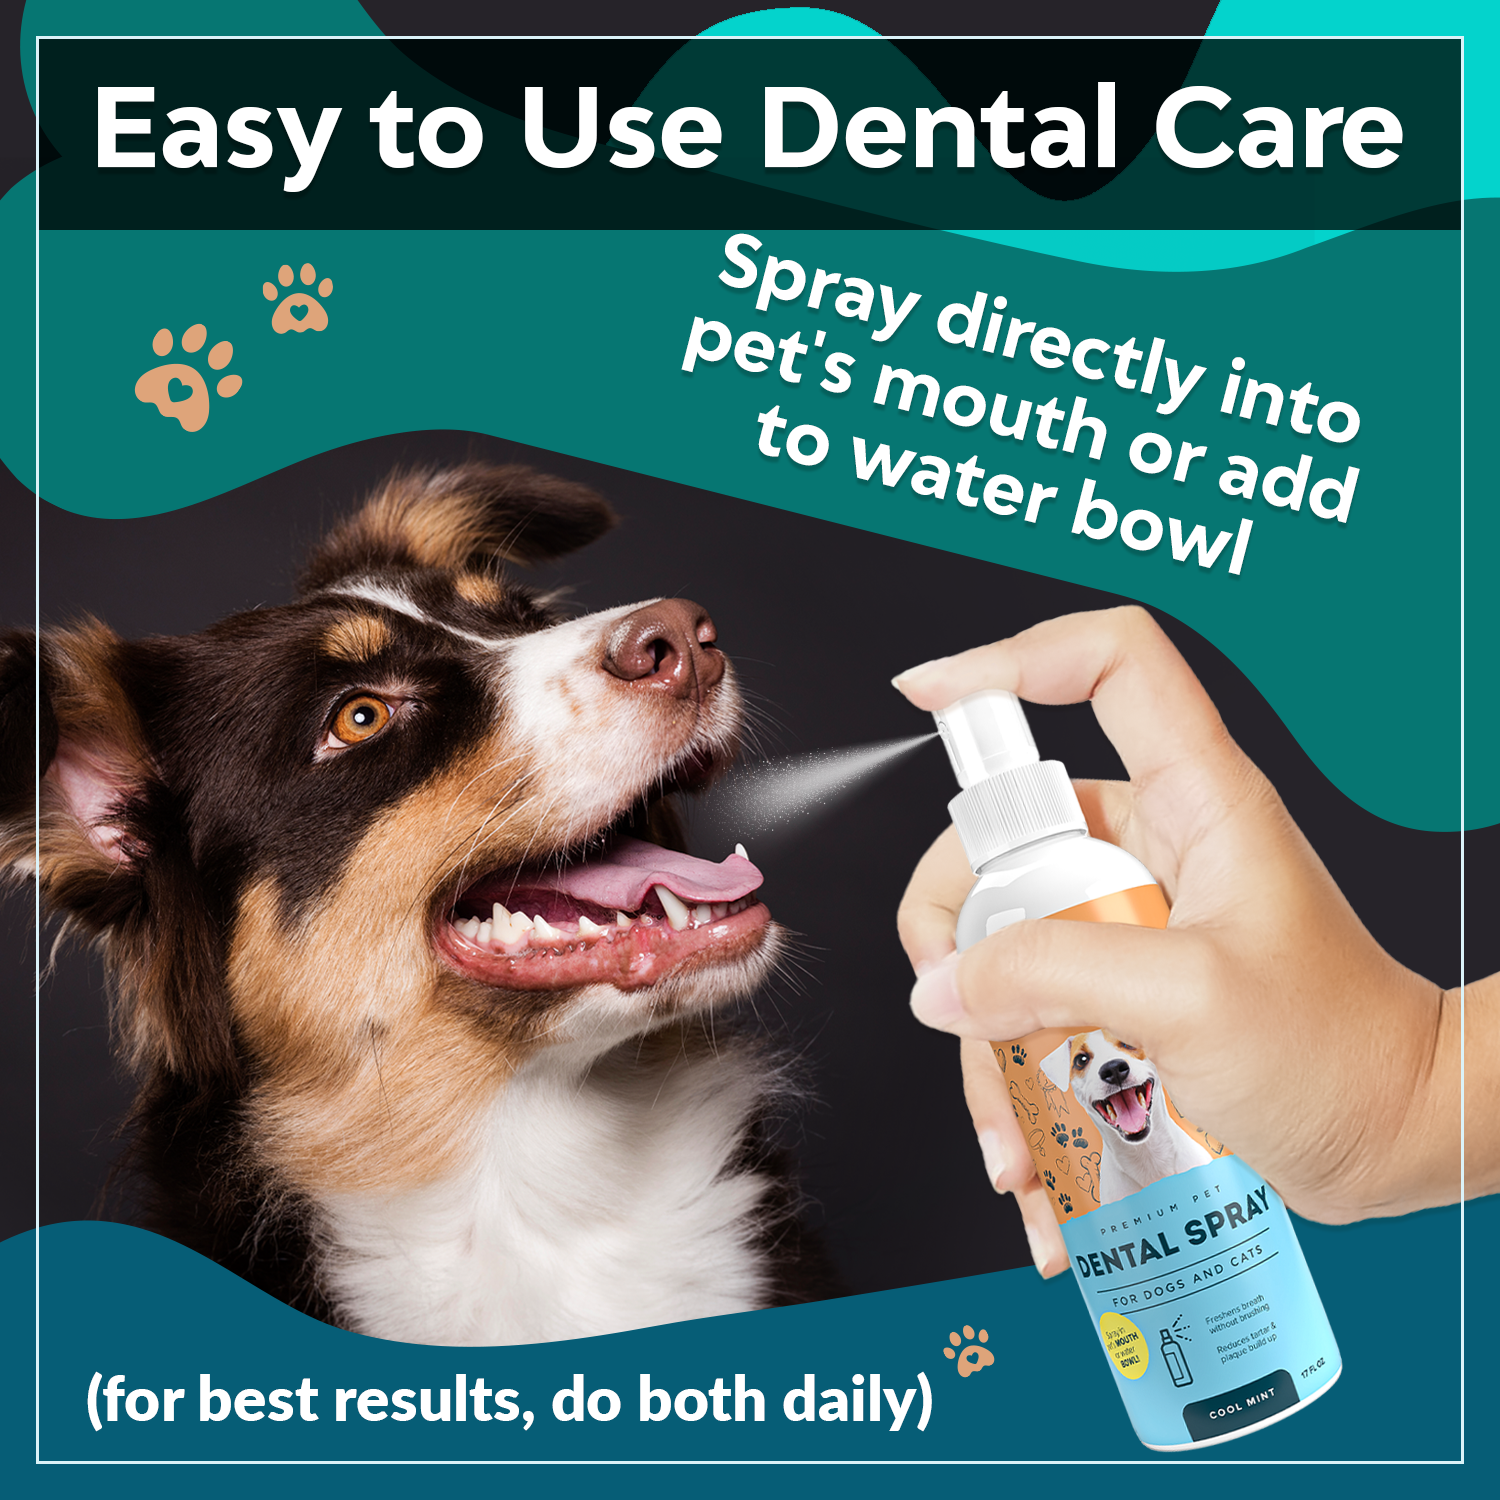 Easy to use dental care